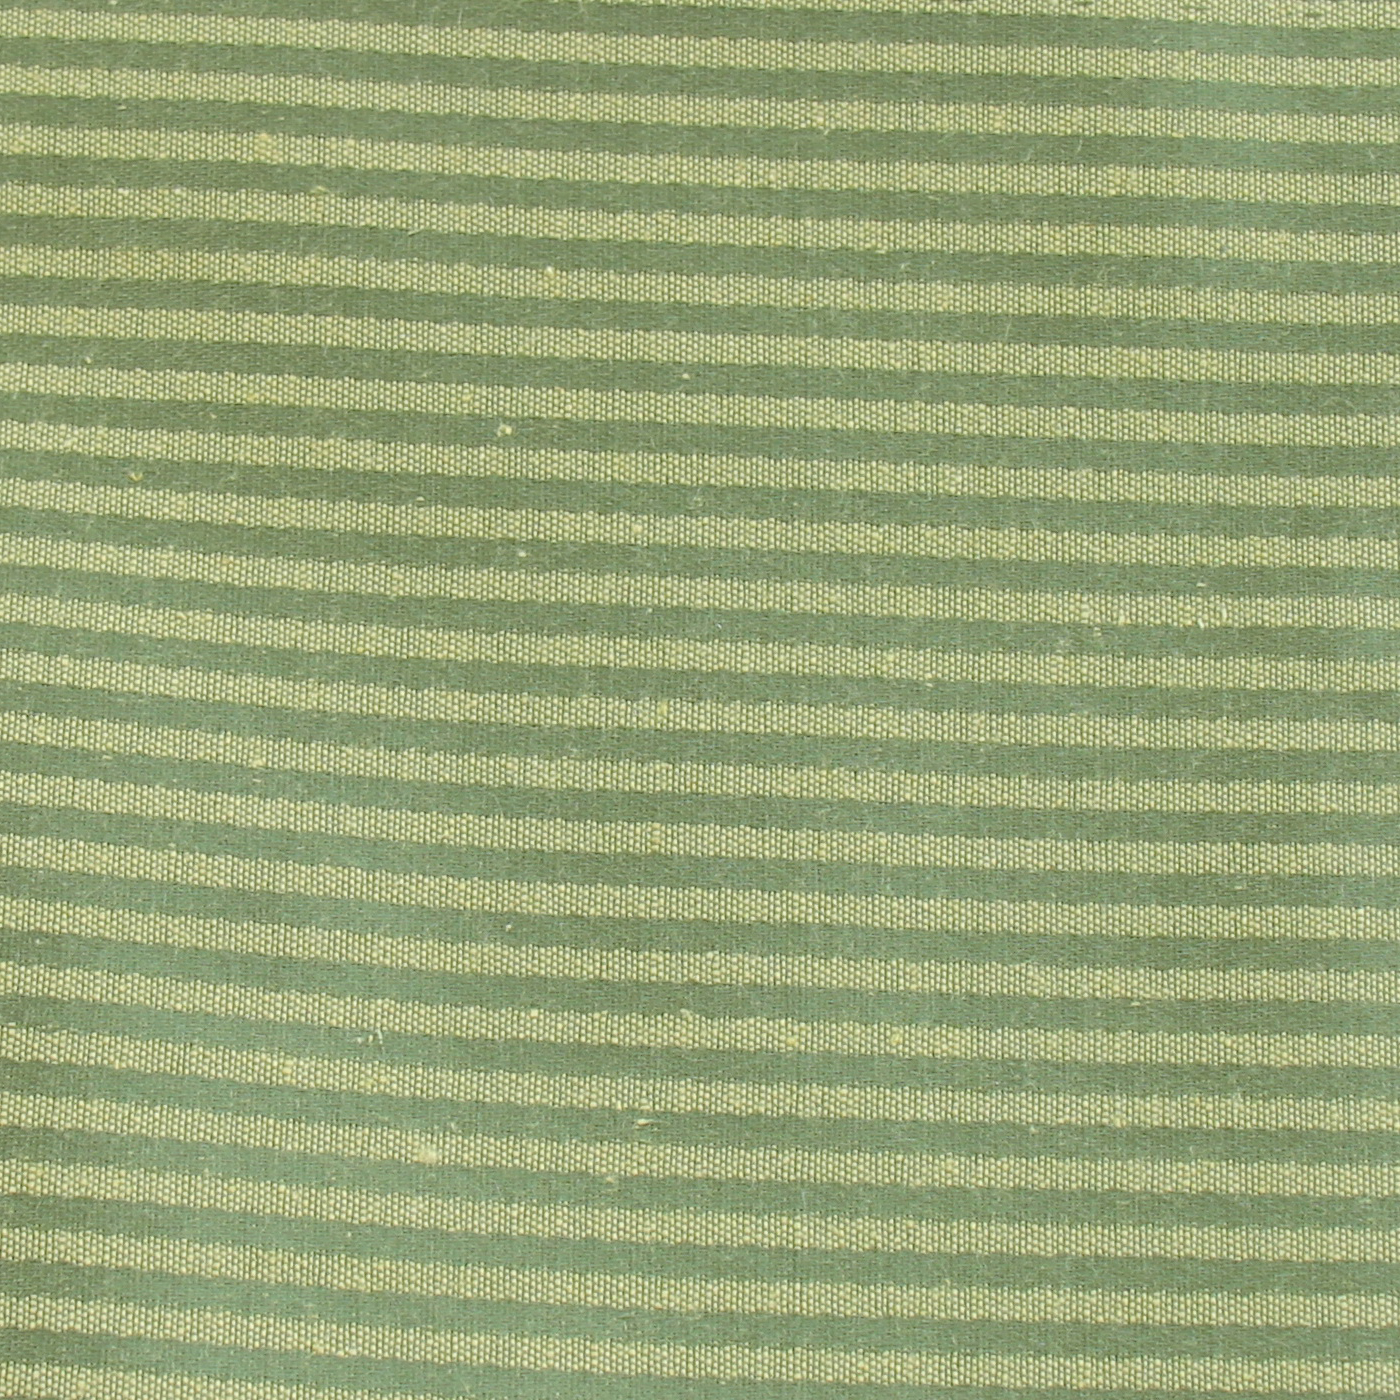 No 3-45 RS X1 D NO 38 Fabric Upholstery Sample